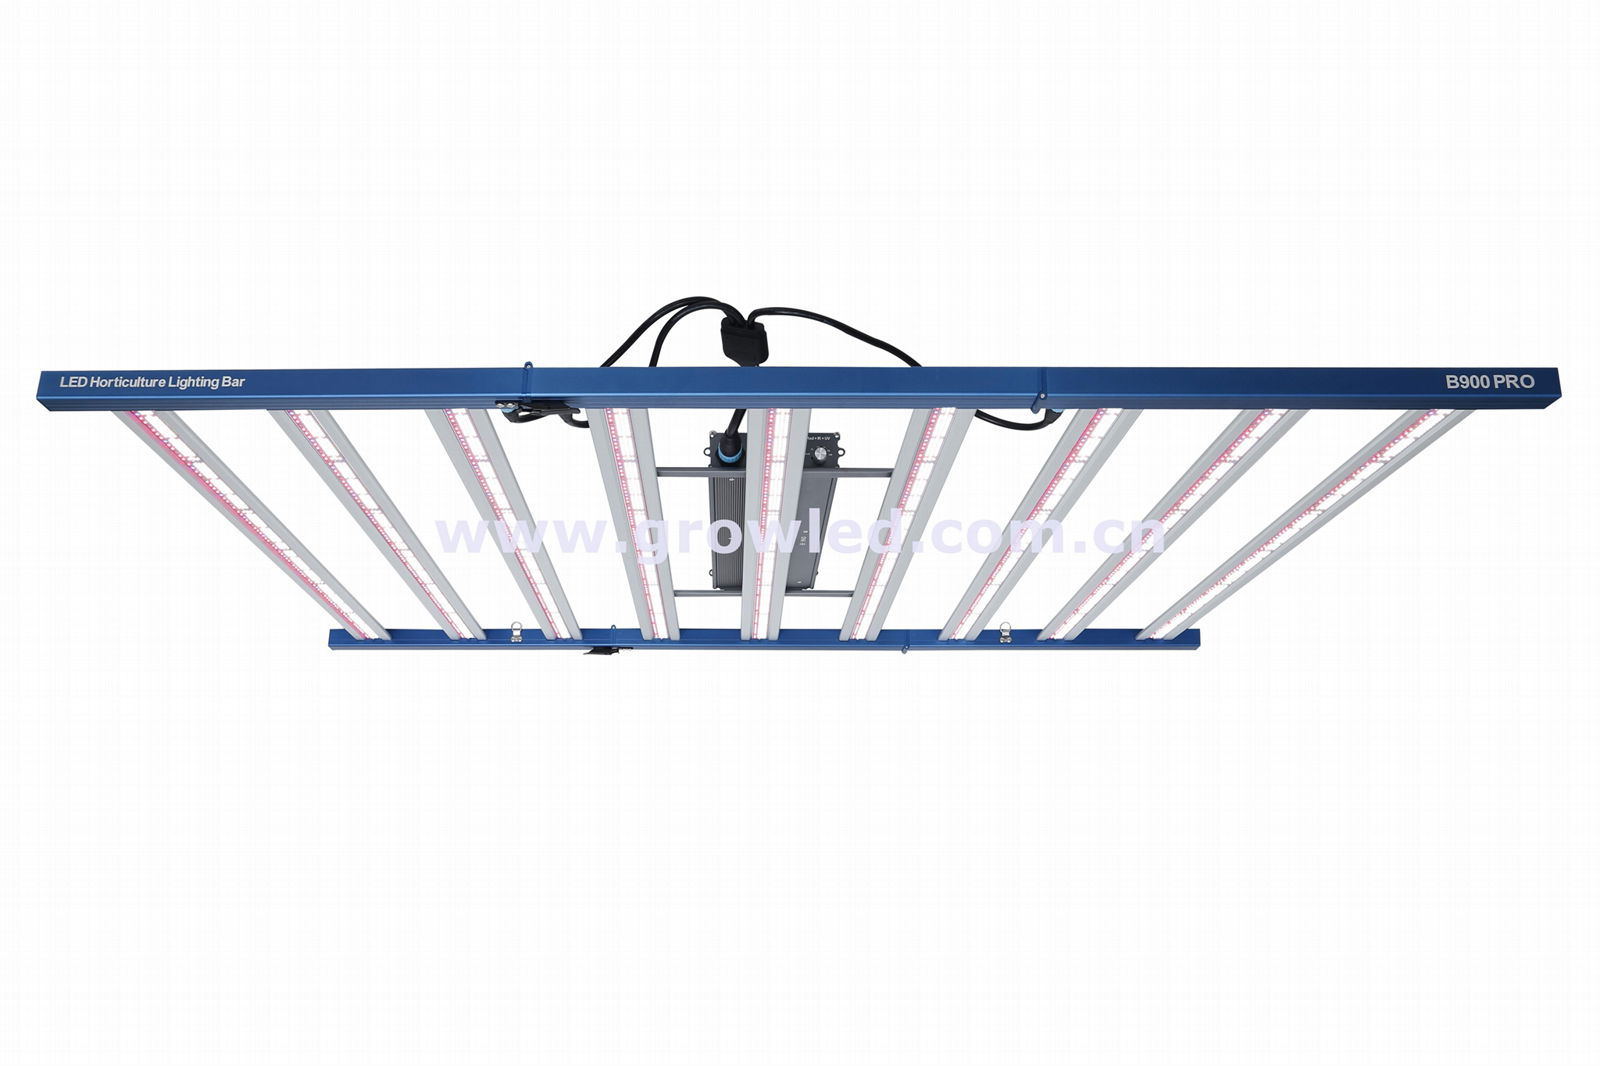 Wholesale Two Channel 1100w led grow lights,warehouse in USA, ETL and DLC listed 4